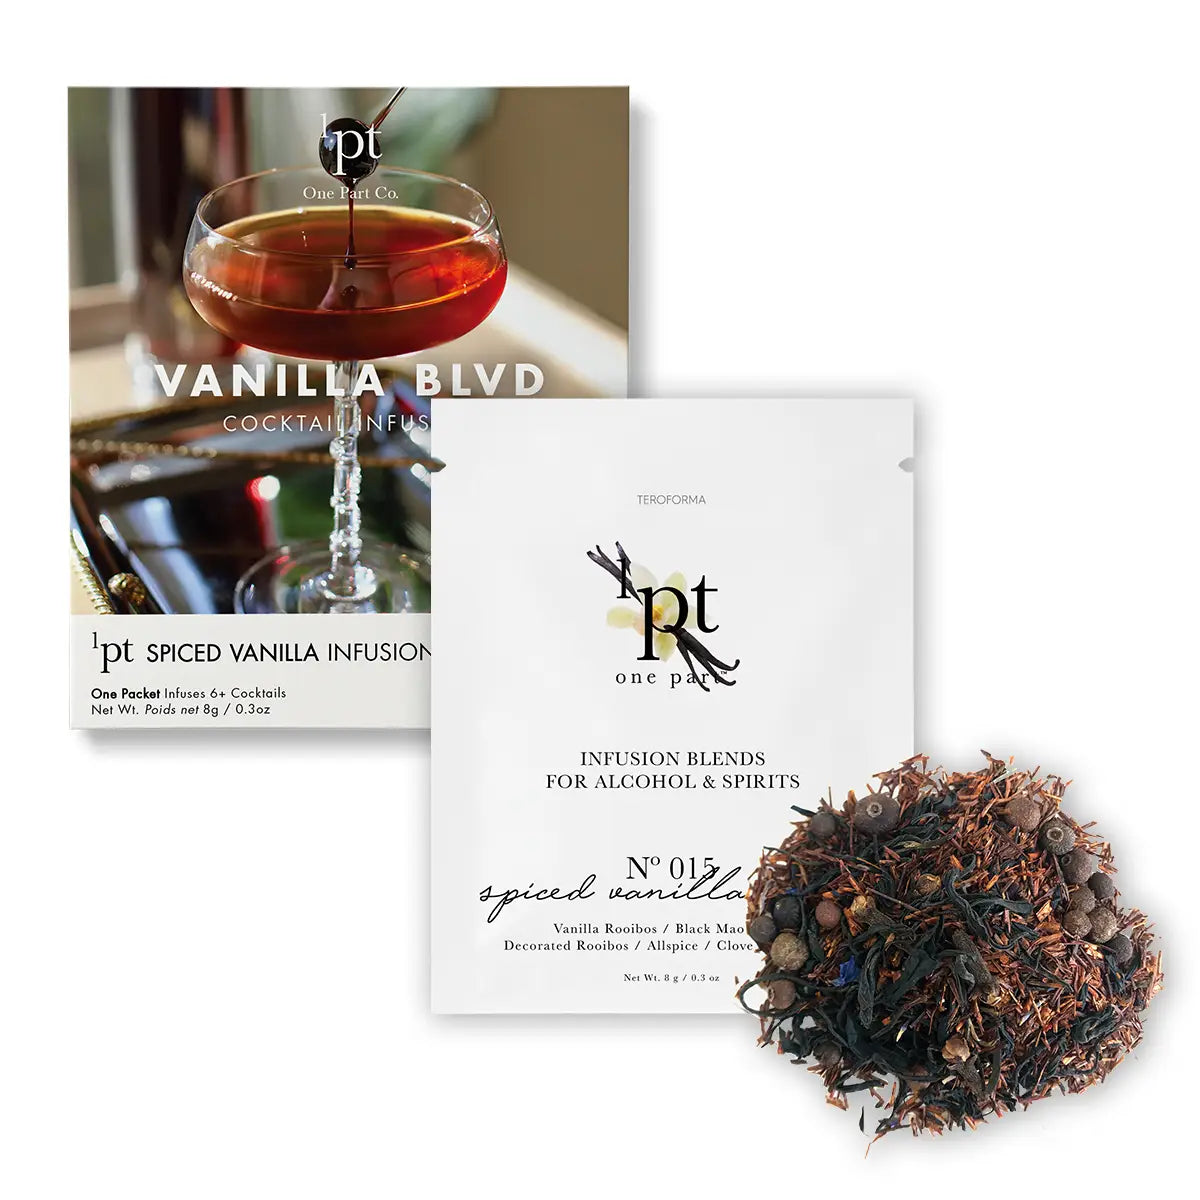 Vanilla BLVD Cocktail Infusion Pack